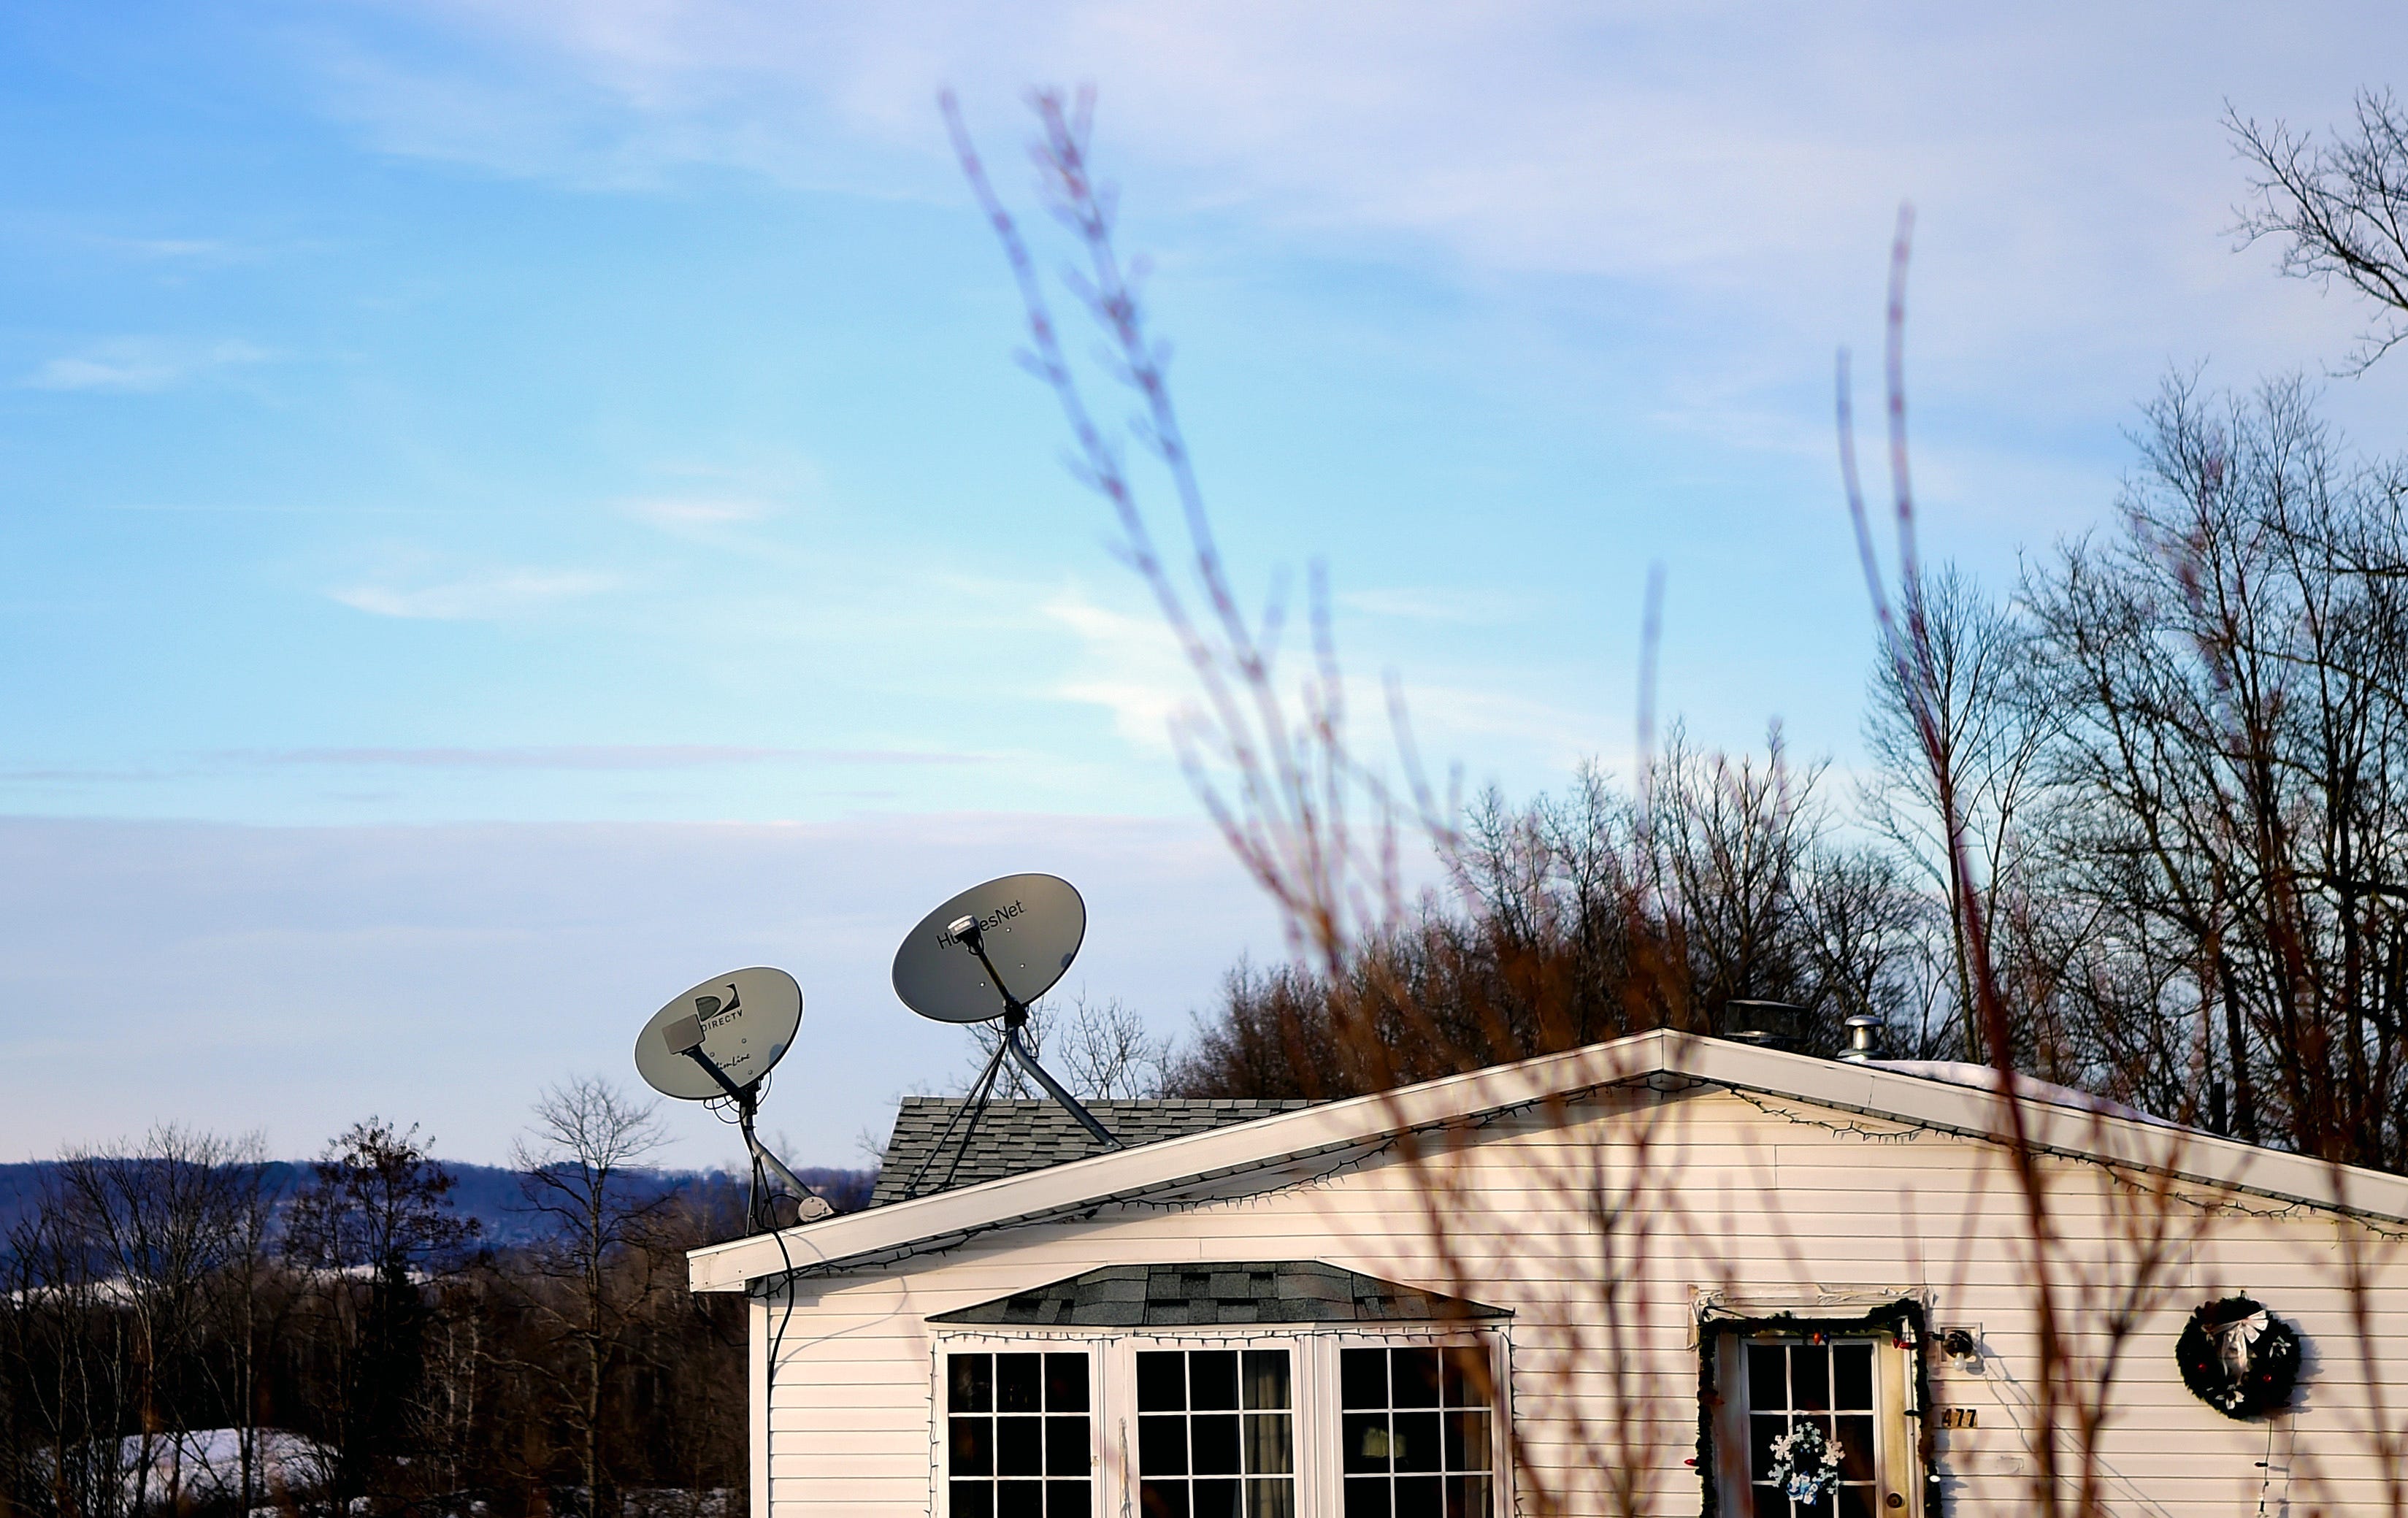 Many residents in rural Steuben County, NY, rely on satellite dishes for television, as digital services are often not available due to unreliable internet. January 28, 2019.